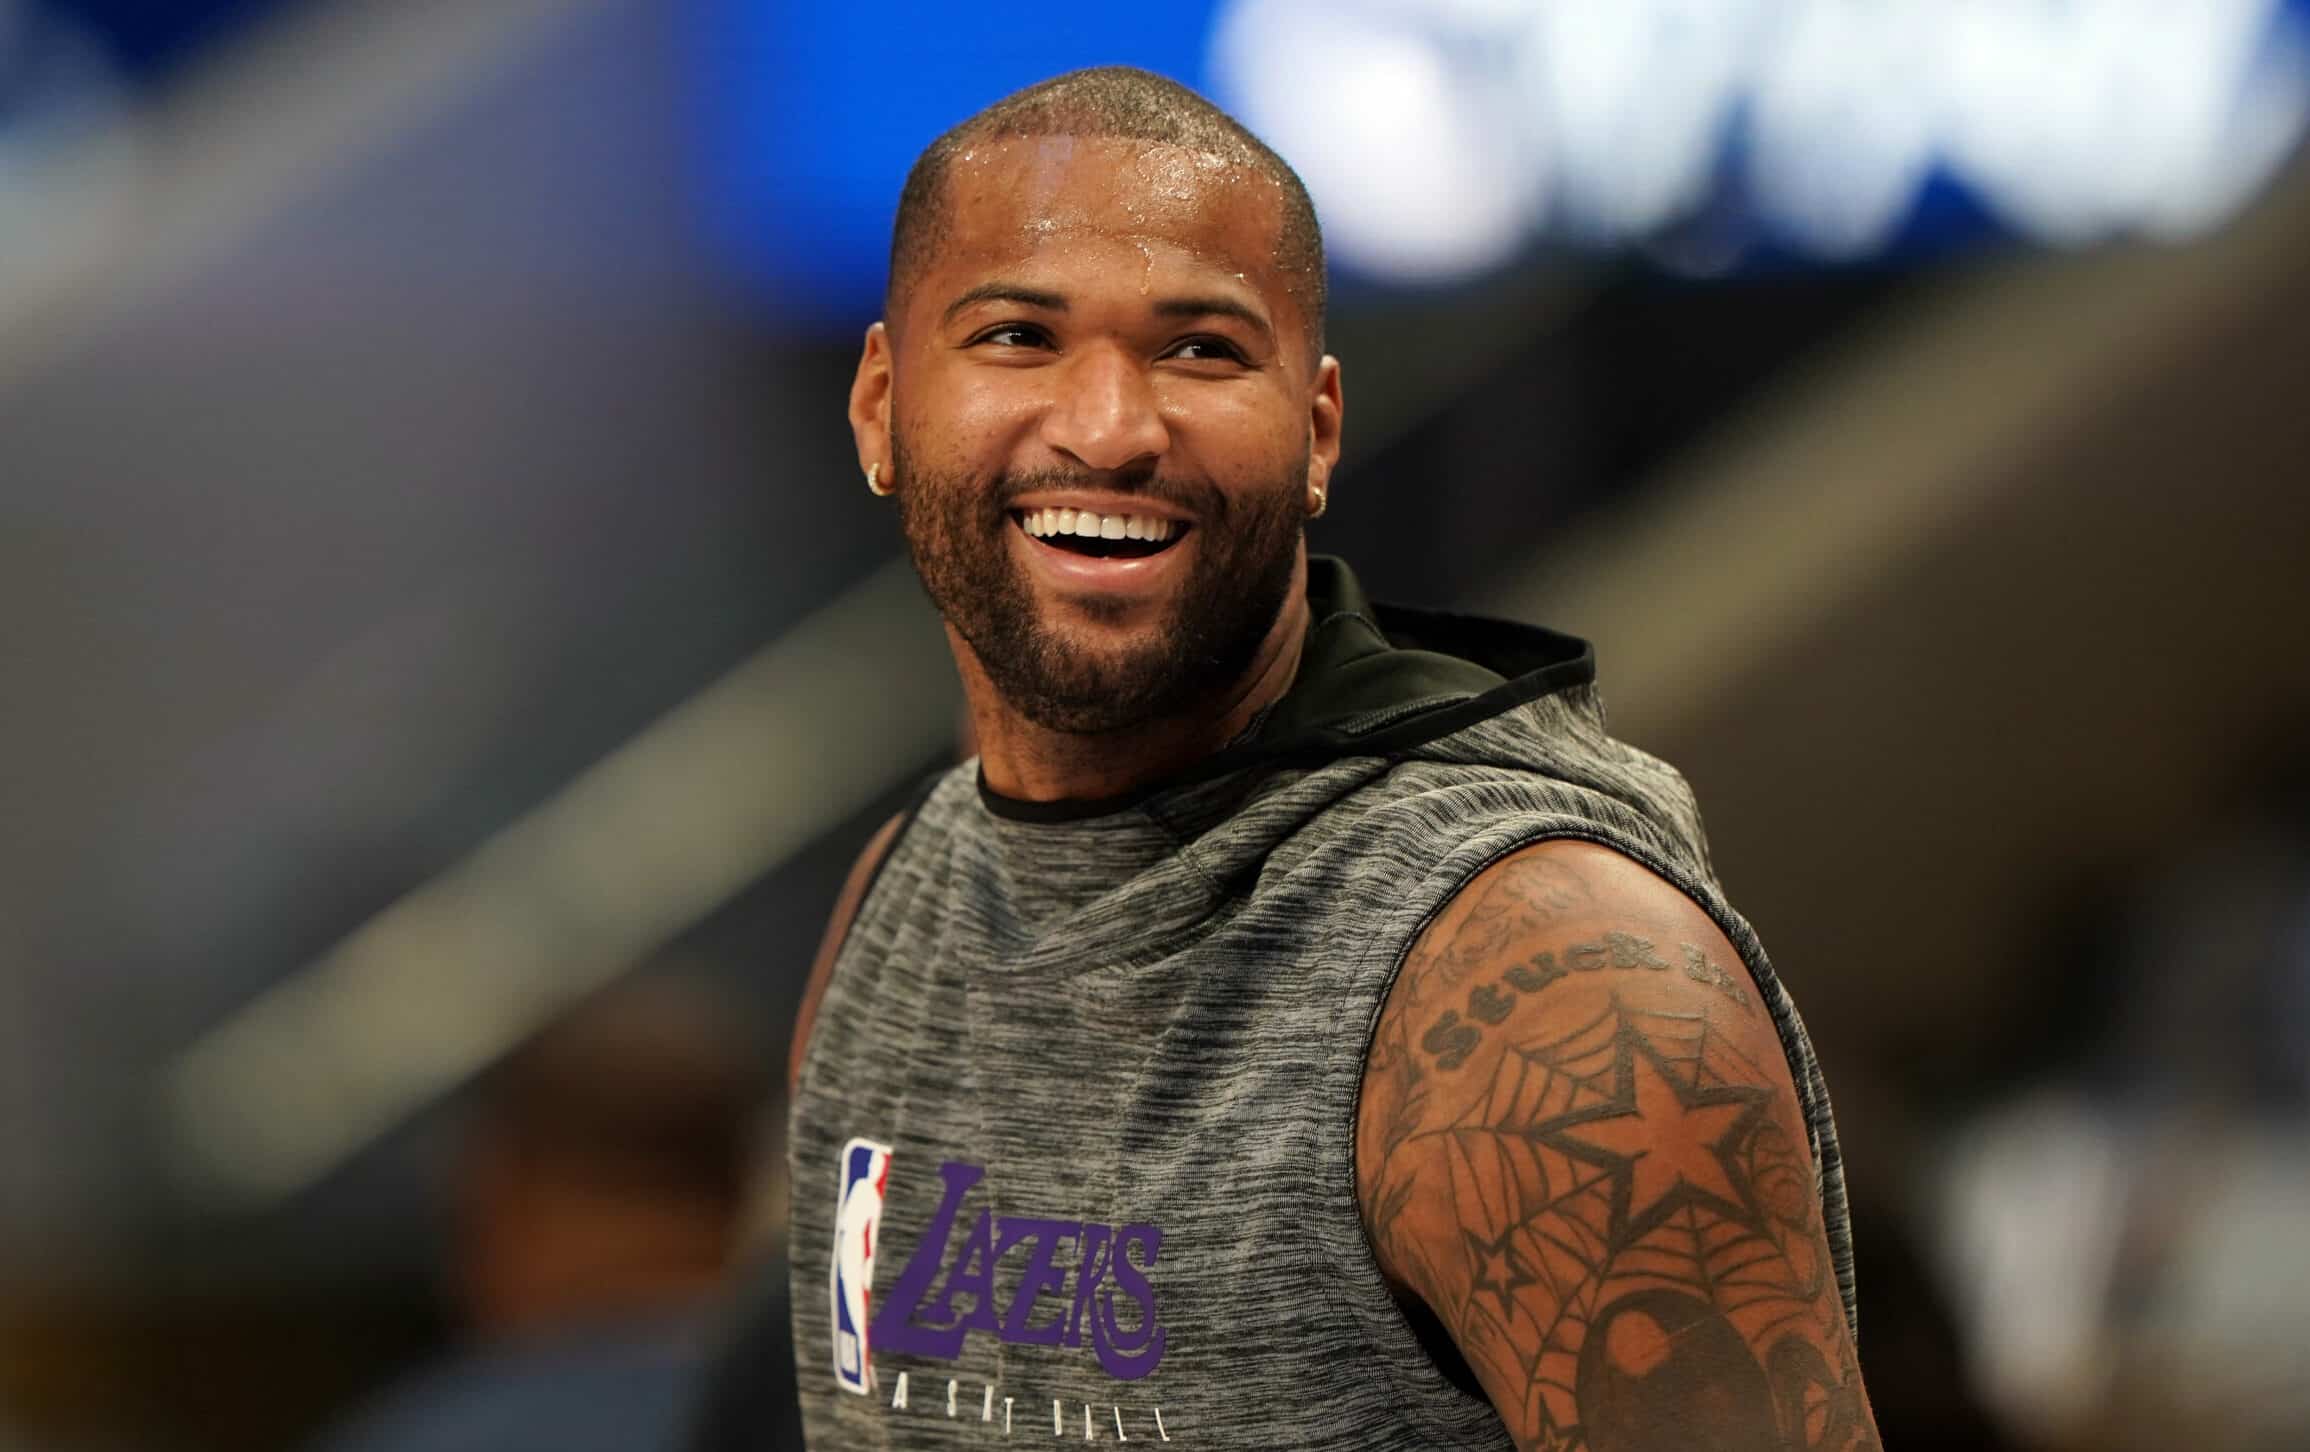 DeMarcus Cousins signs with the Clippers!